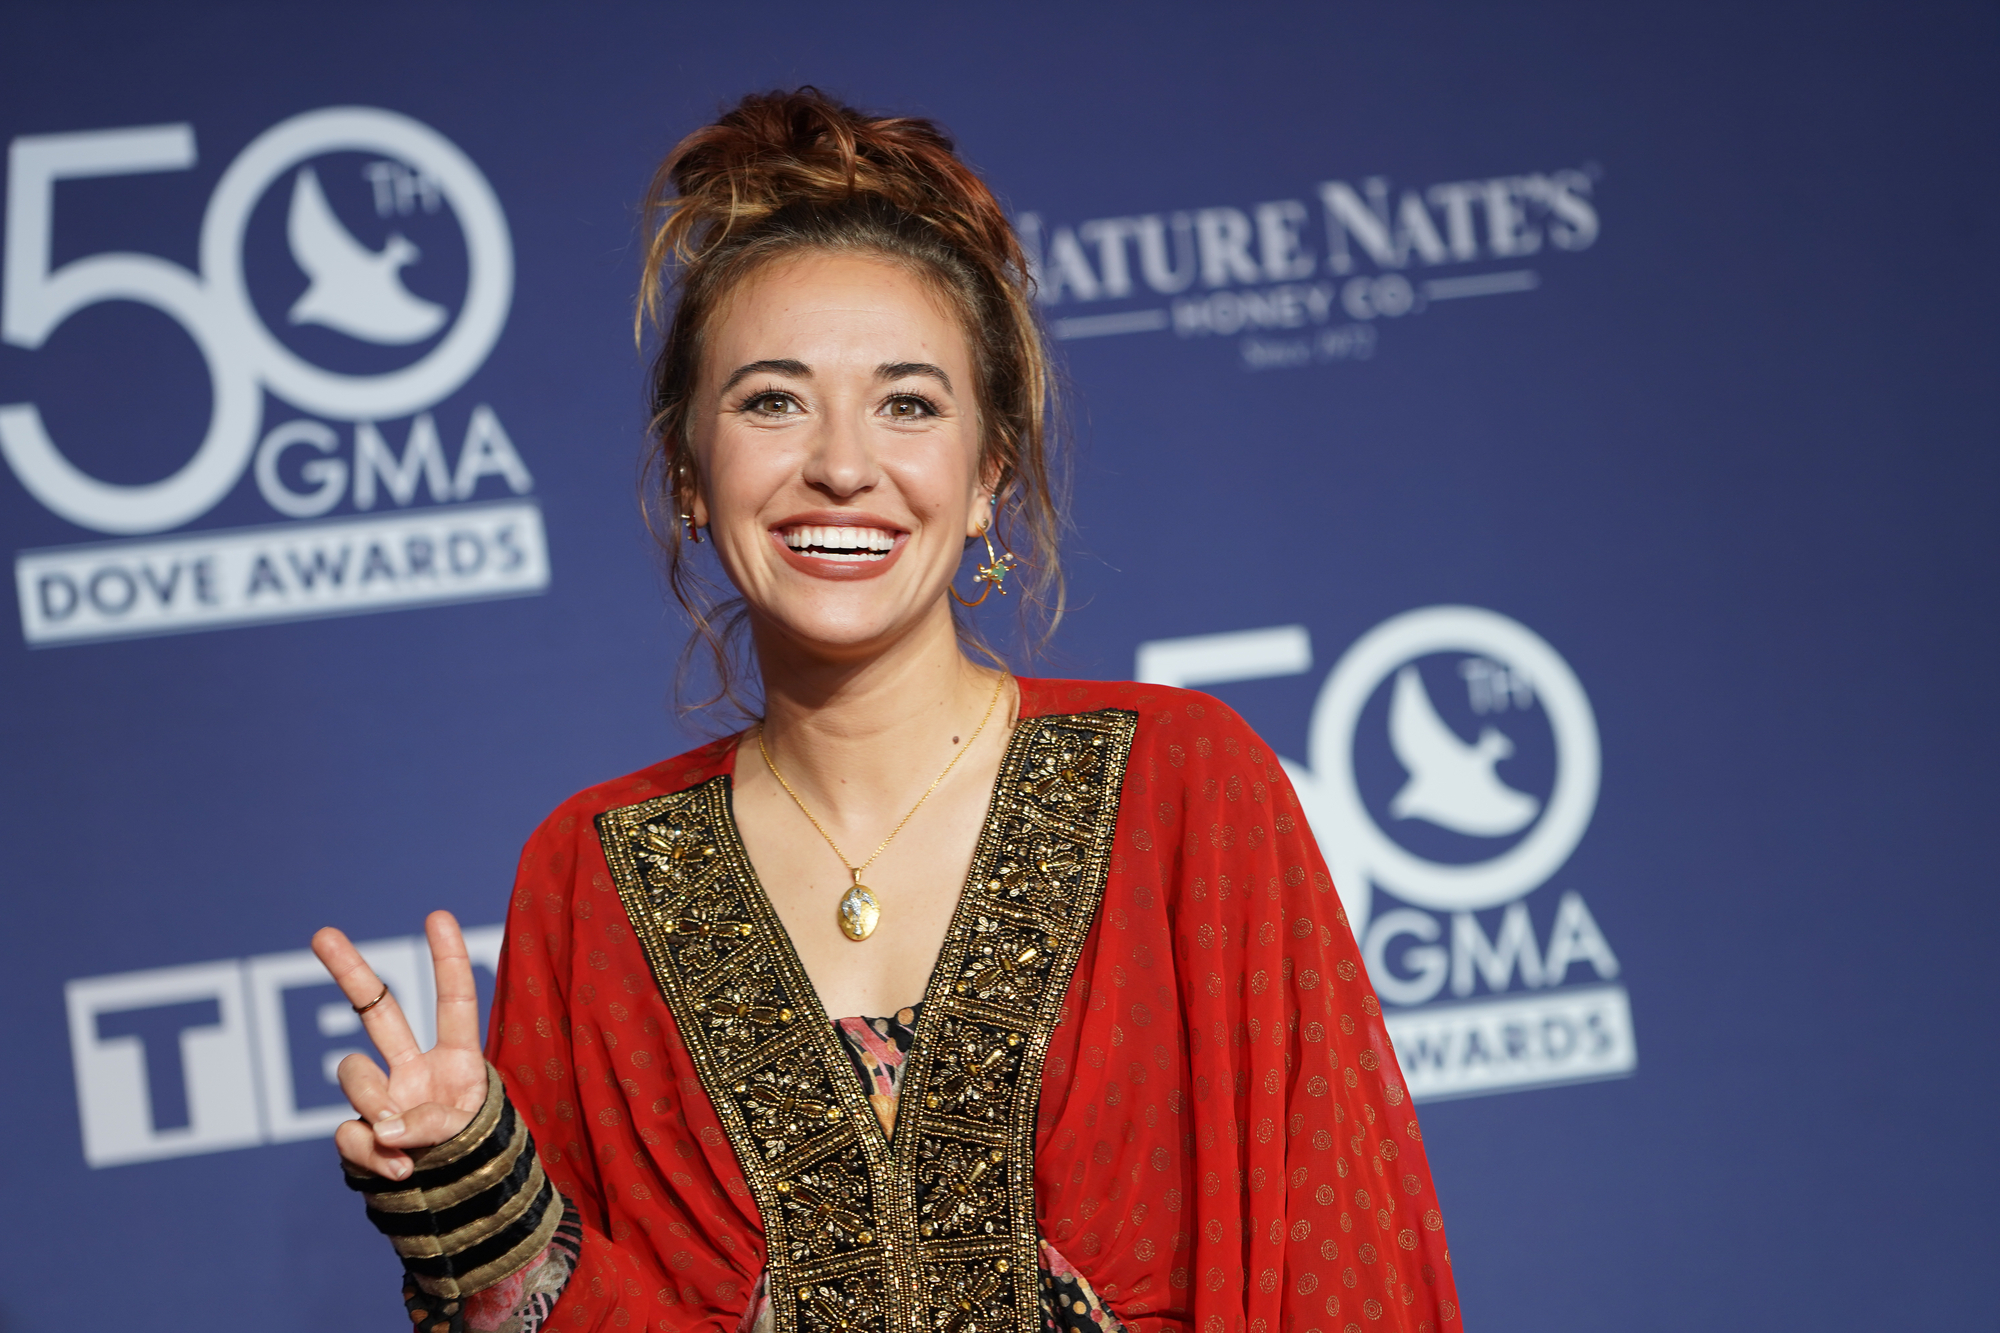 Singer Lauren Daigle Walk the Red Carpet at the 50th GMA Dove Awards at Linbscome University in Nashville, Tennessee on October 15, 2019. Photo Credit: Marty Jean-Louis